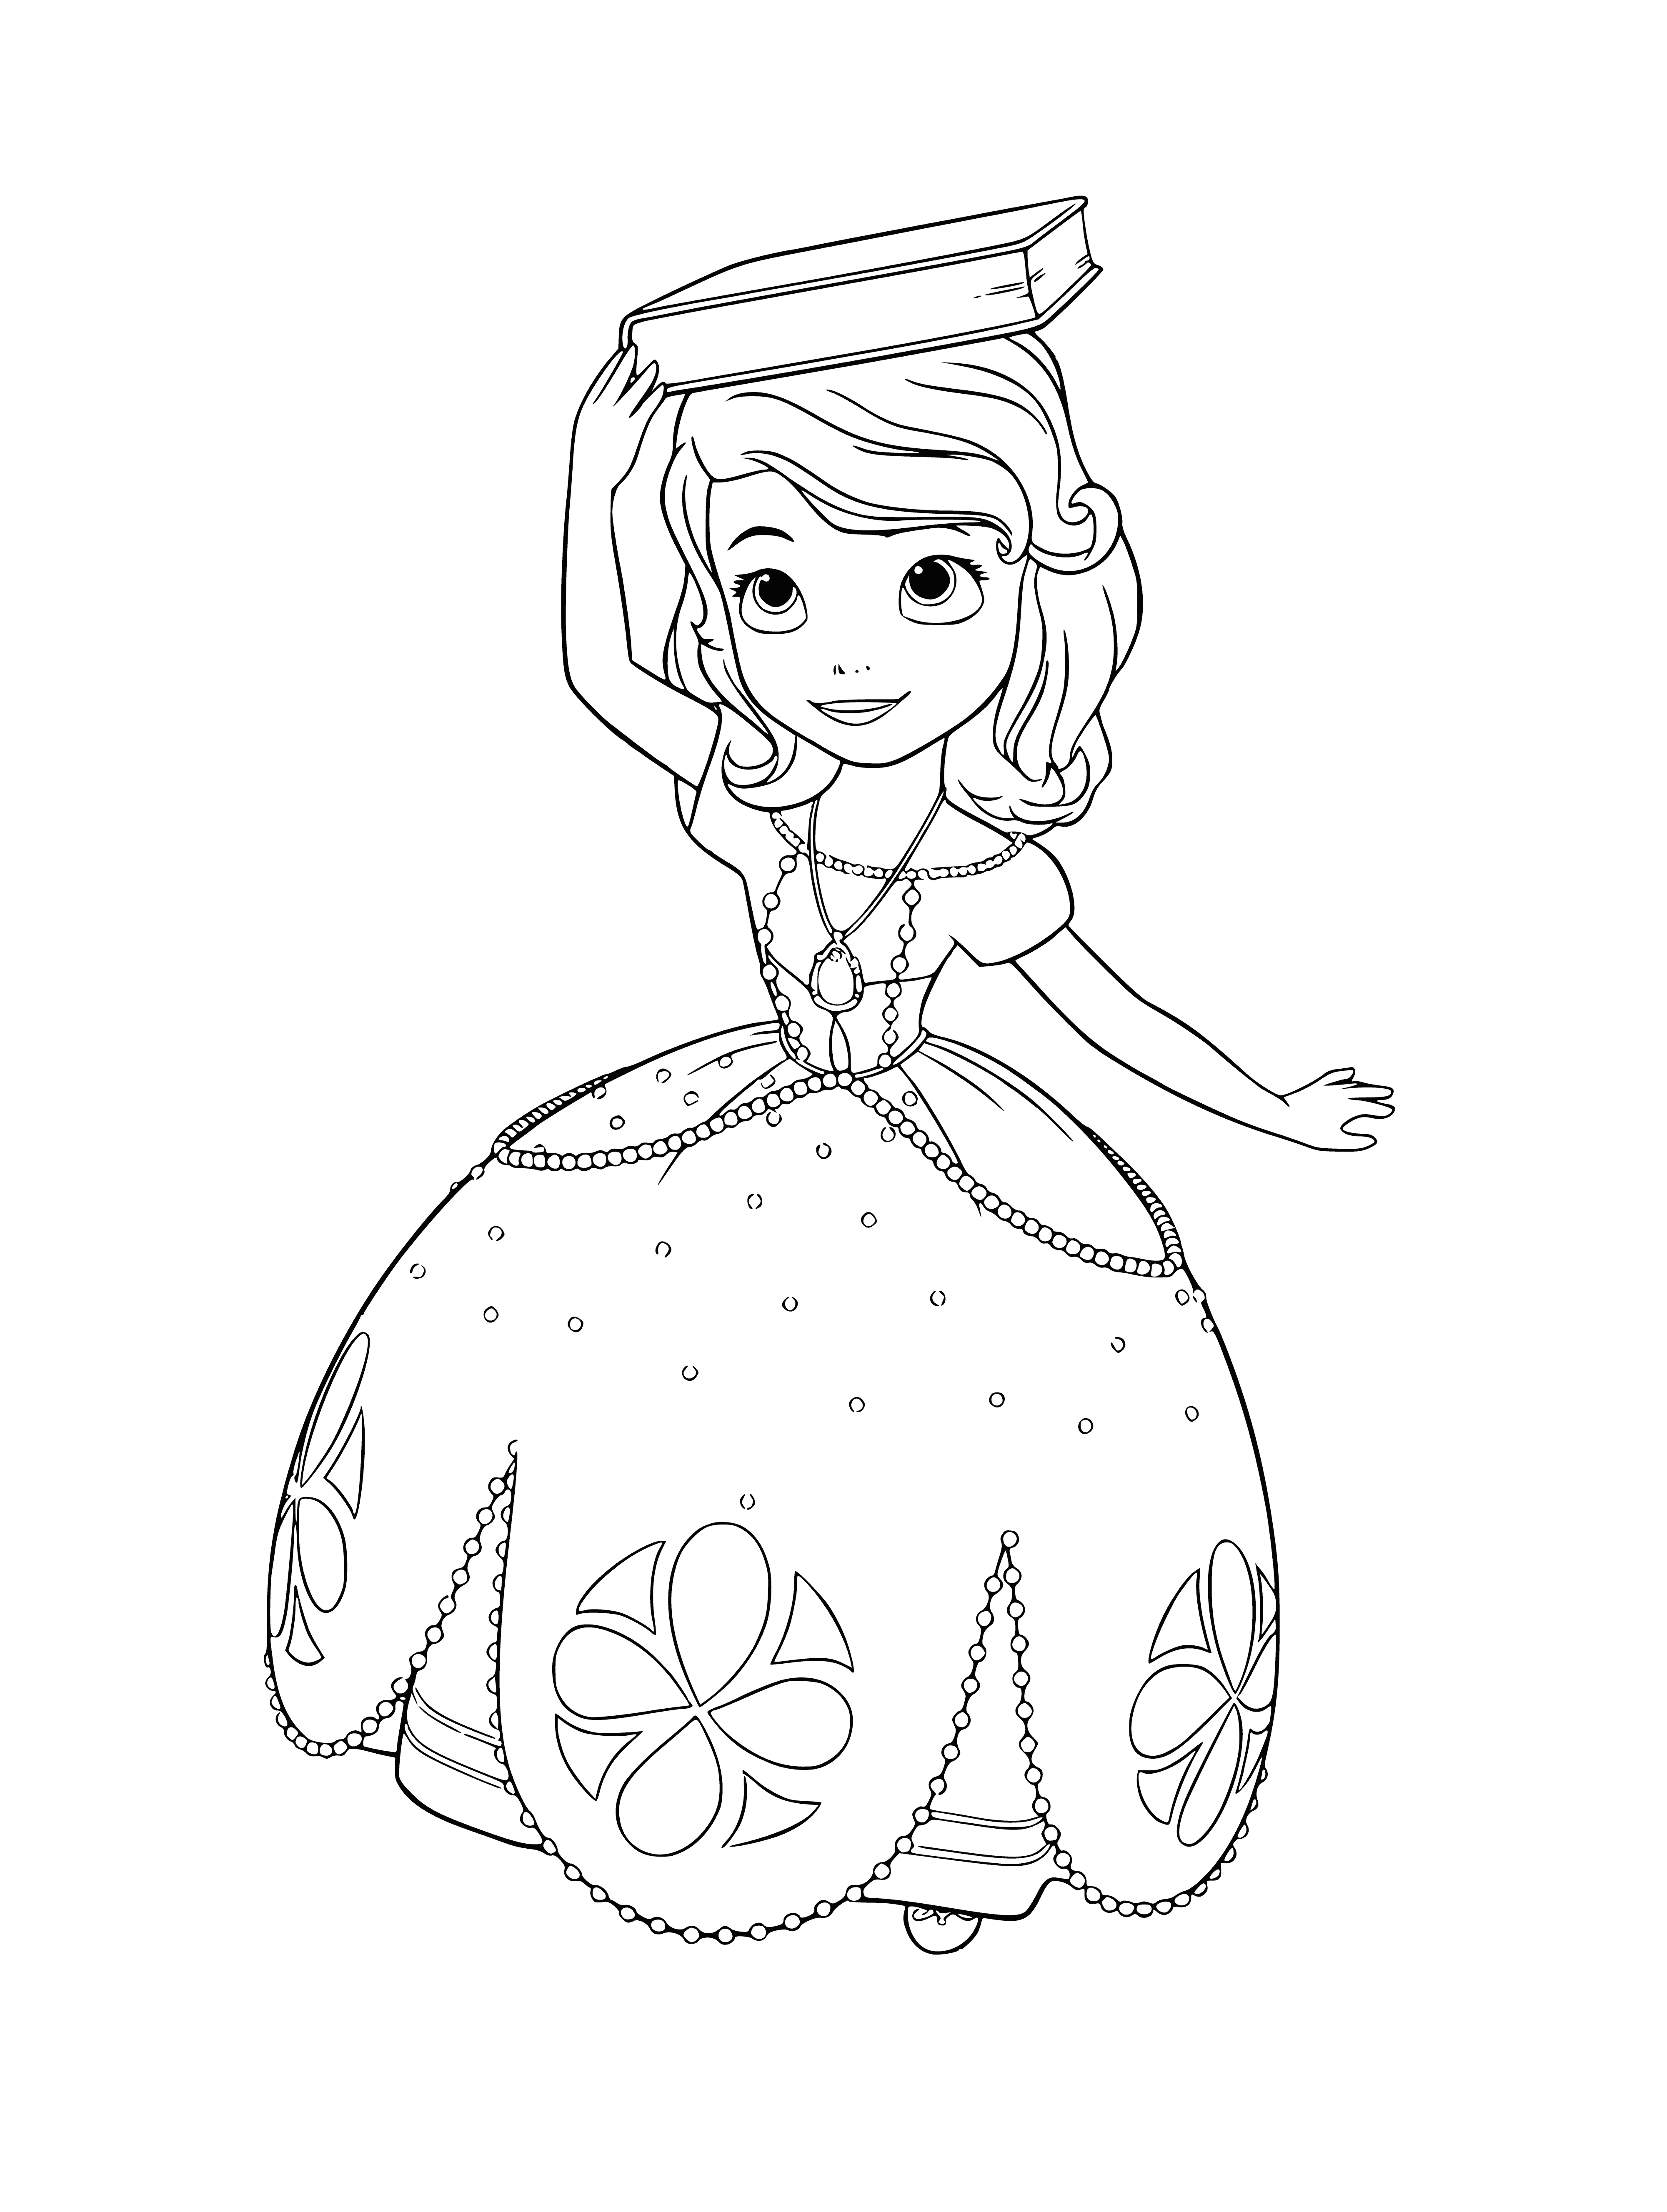 coloring page: Princess Sofia reads a book while wearing her purple dress.